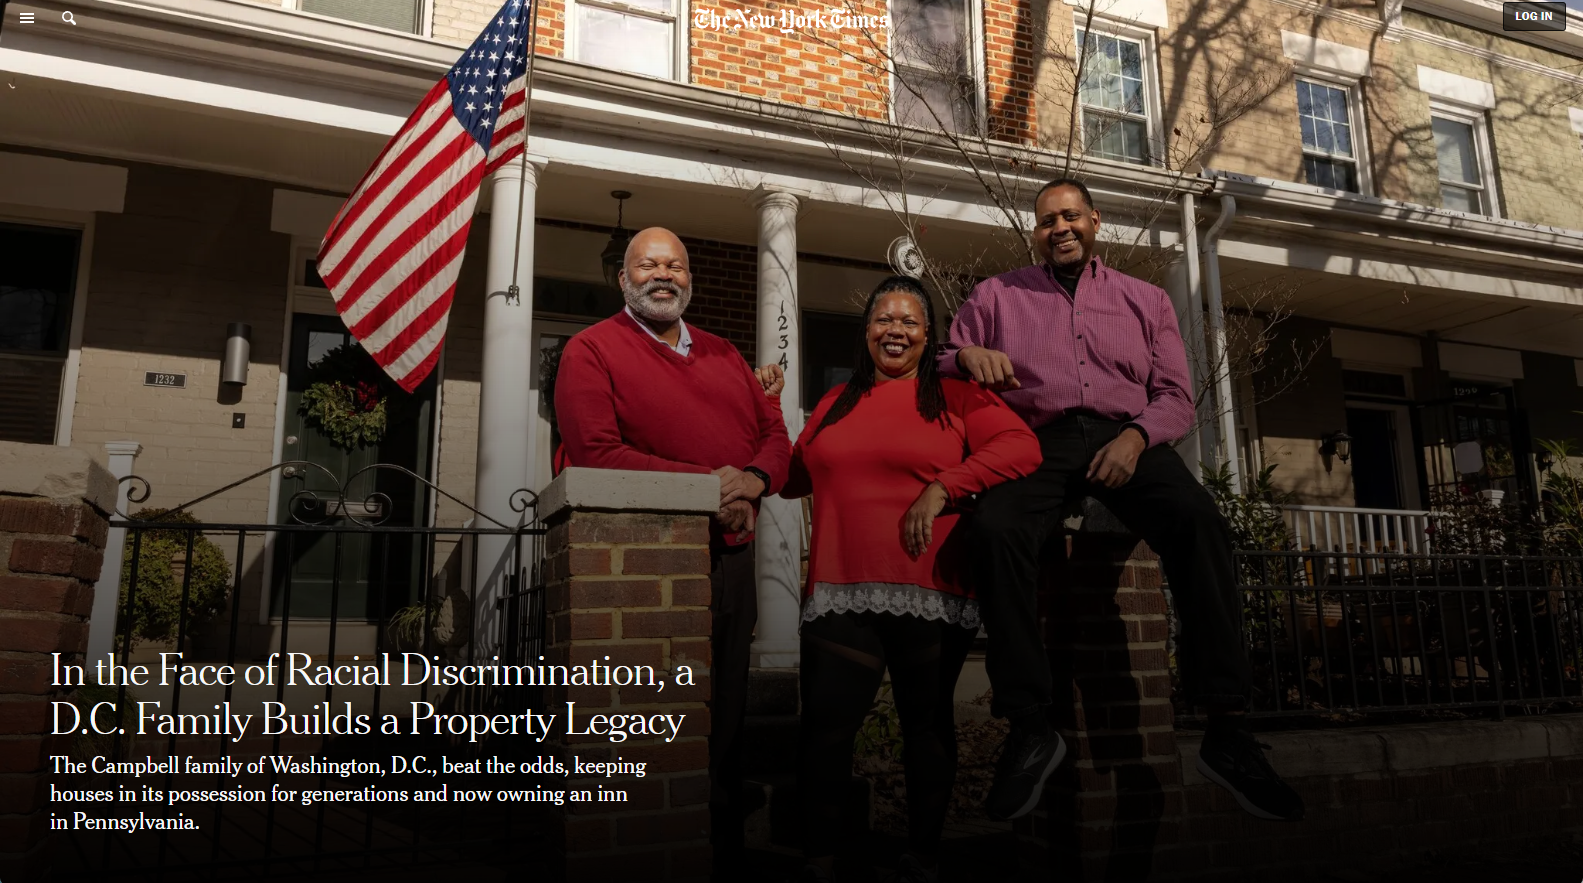 in the face of racial discrimination a d.c. family builds a property legacy